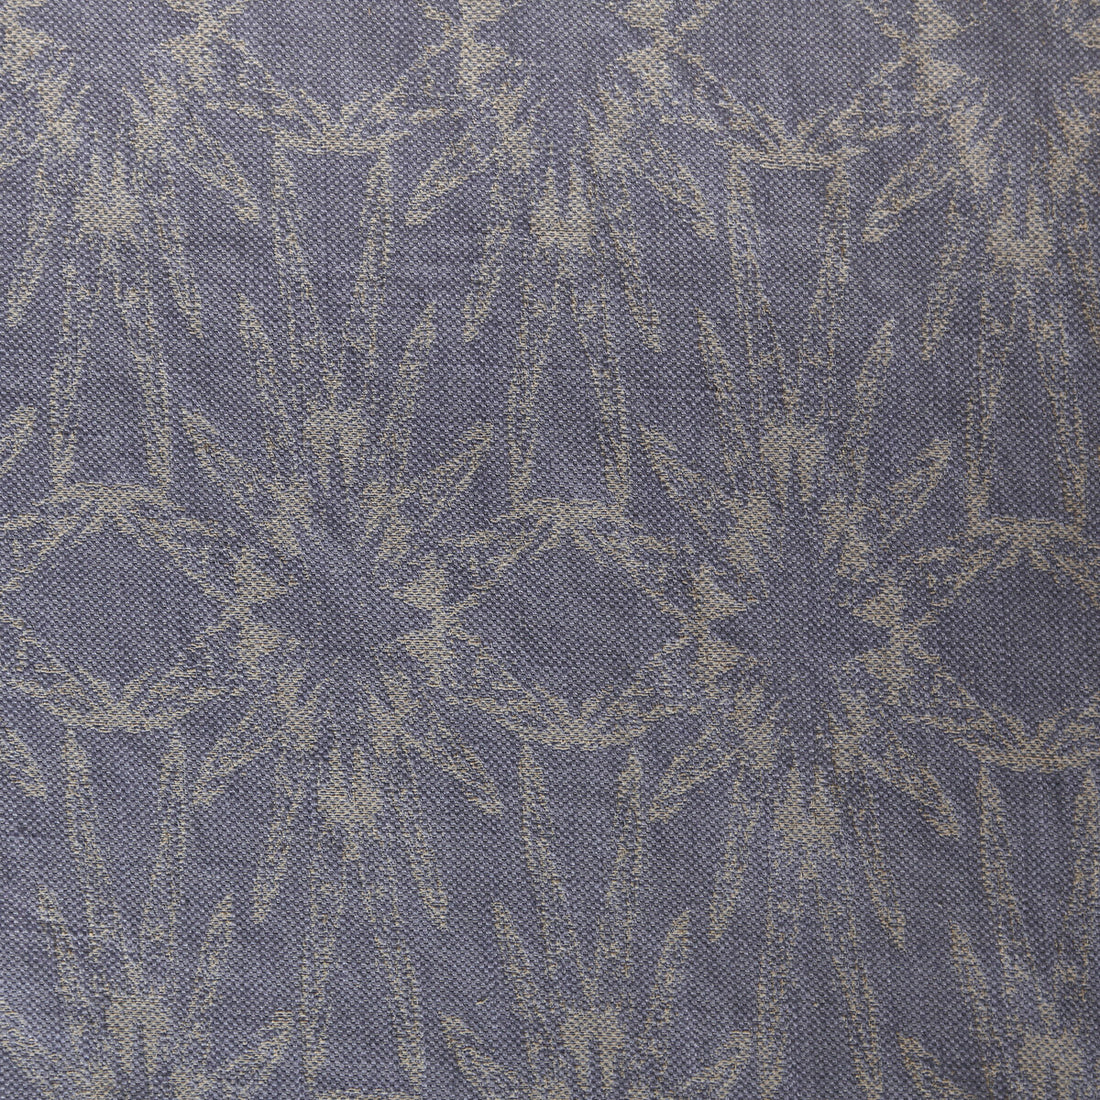 Starfish fabric in lavender color - pattern GWF-3202.510.0 - by Lee Jofa Modern in the Allegra Hicks Islands collection